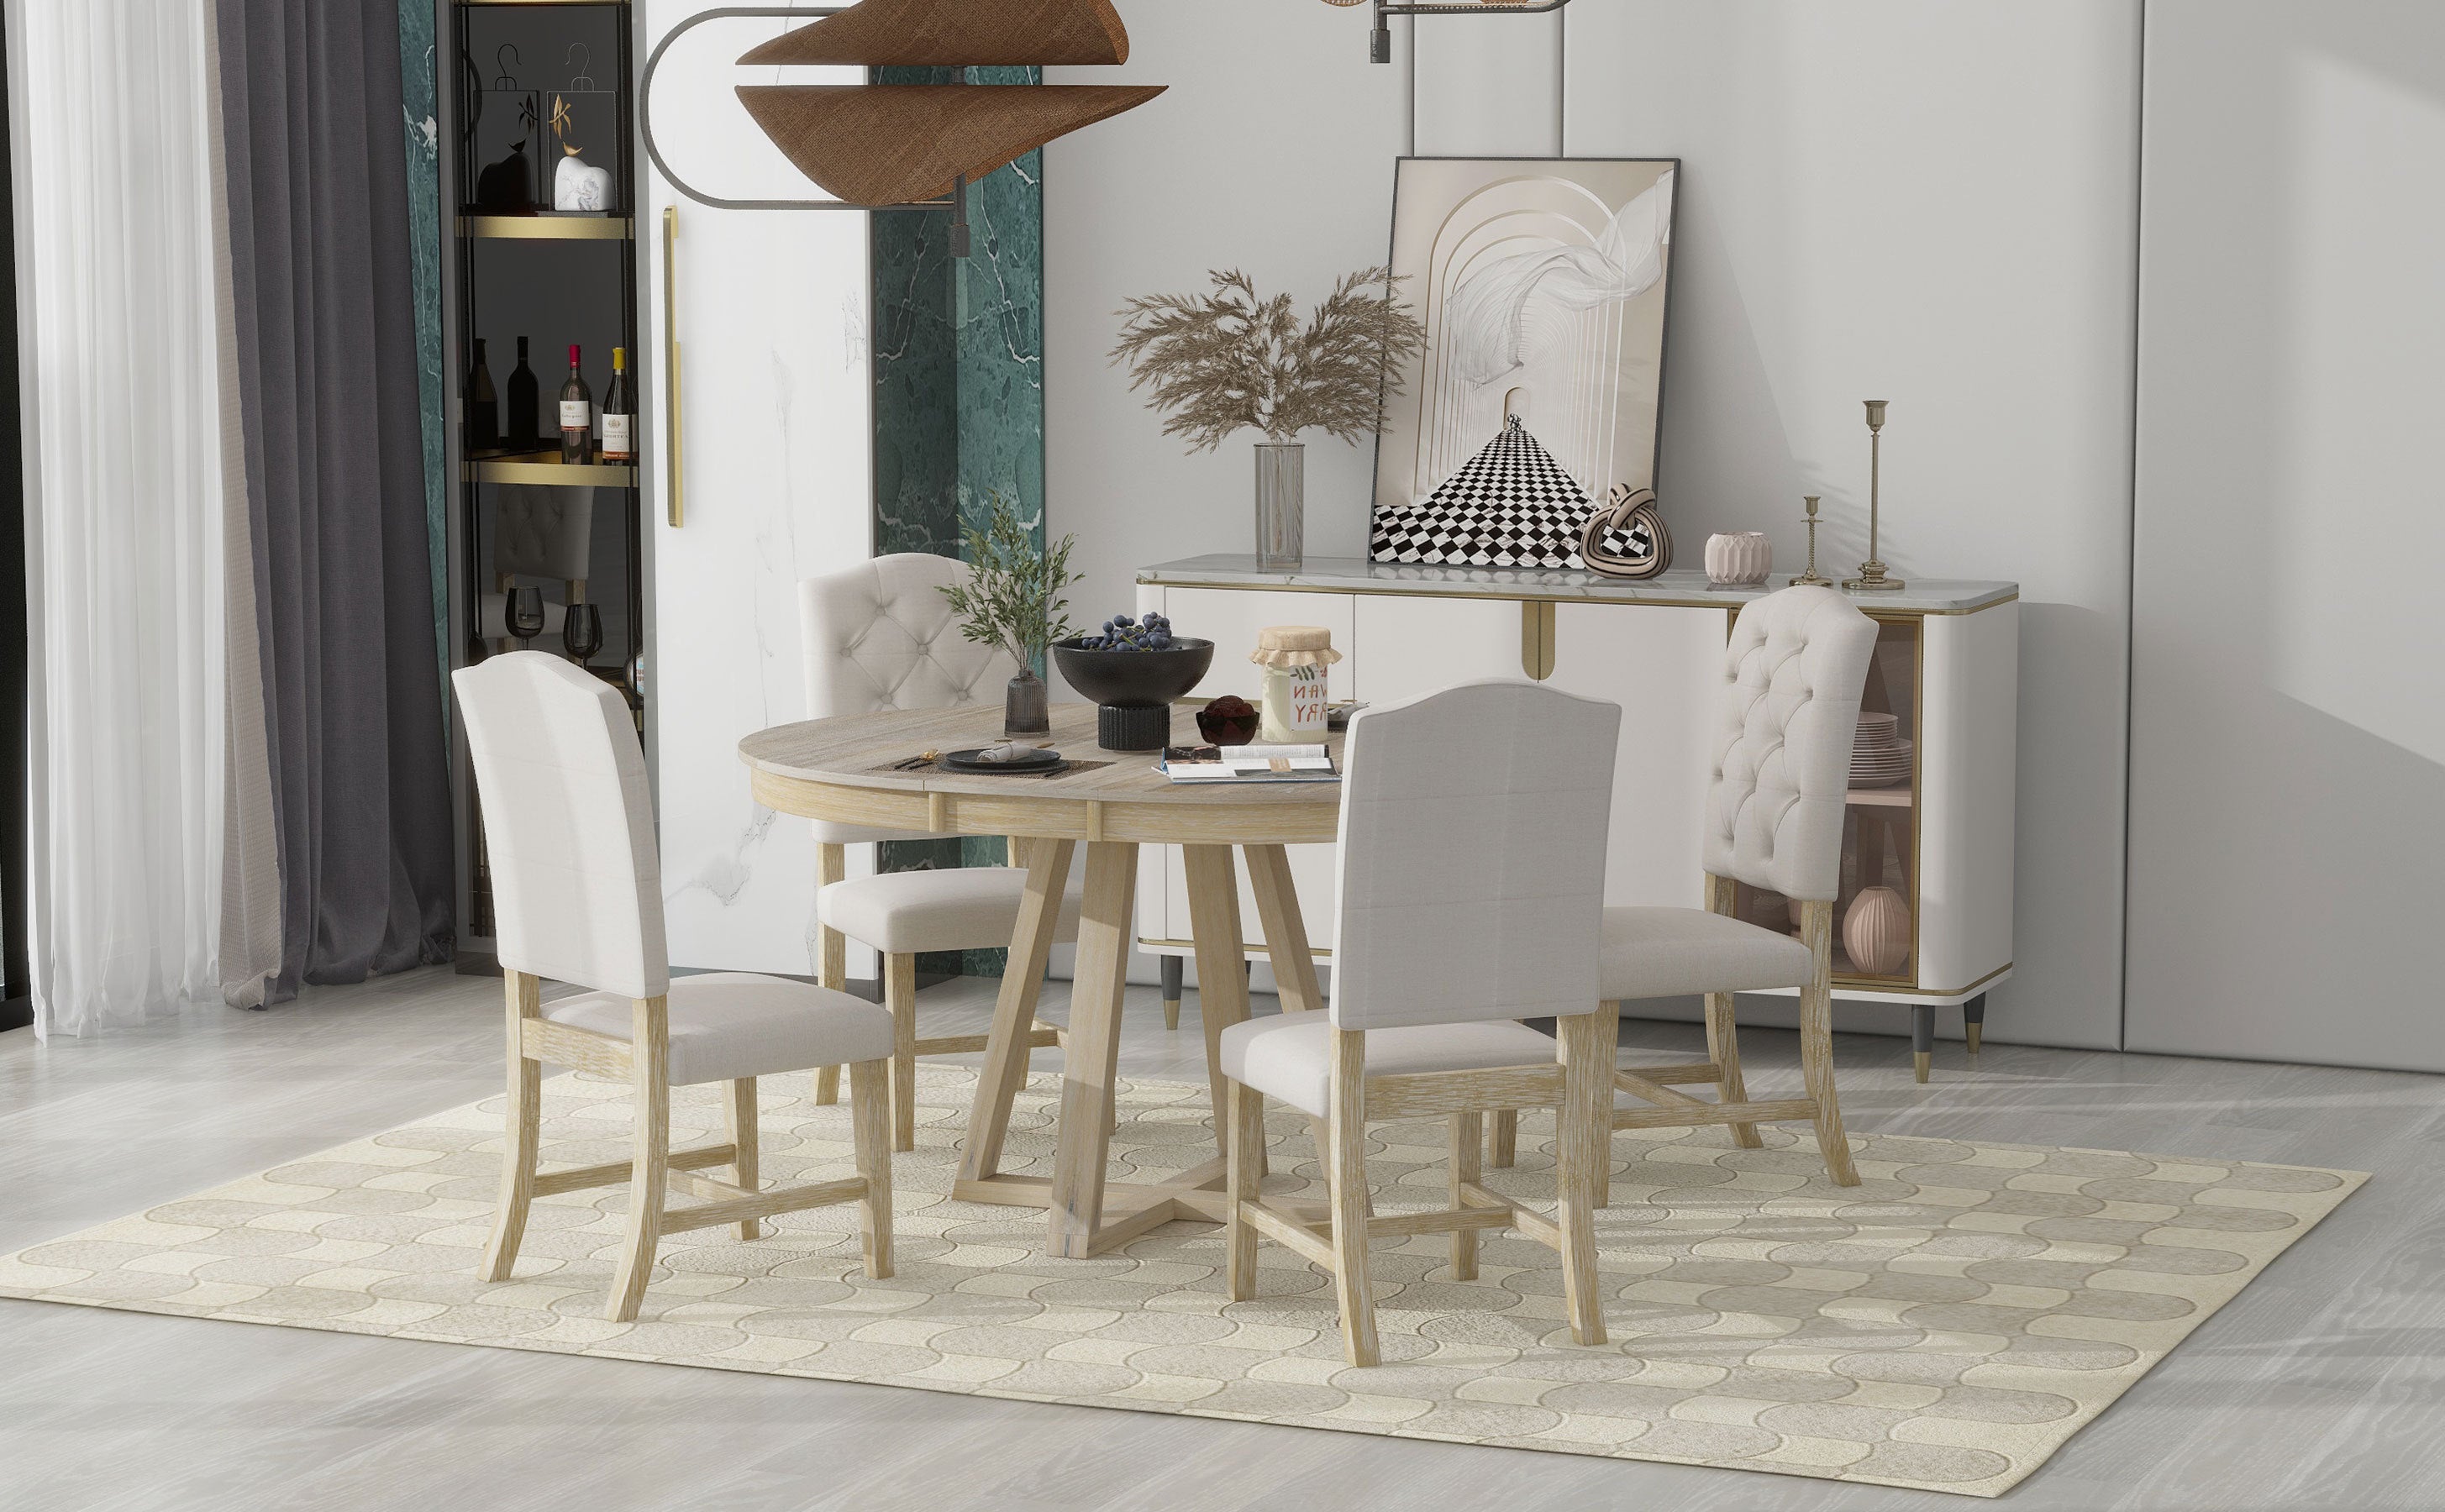 5-Piece Retro Functional Dining Set, Round Table with a 16"W Leaf and 4 Upholstered Chairs - Natural